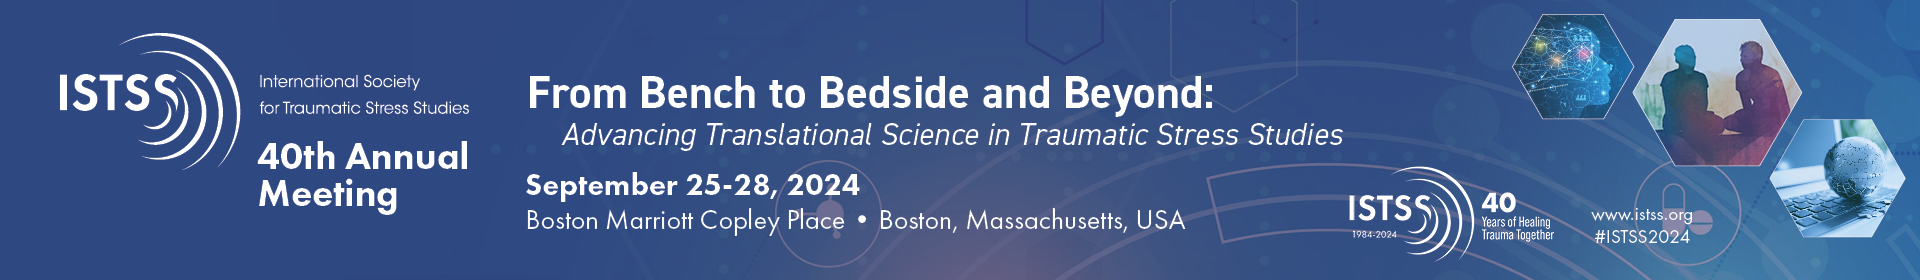 ISTSS 40th Annual Meeting 2024 Event Banner